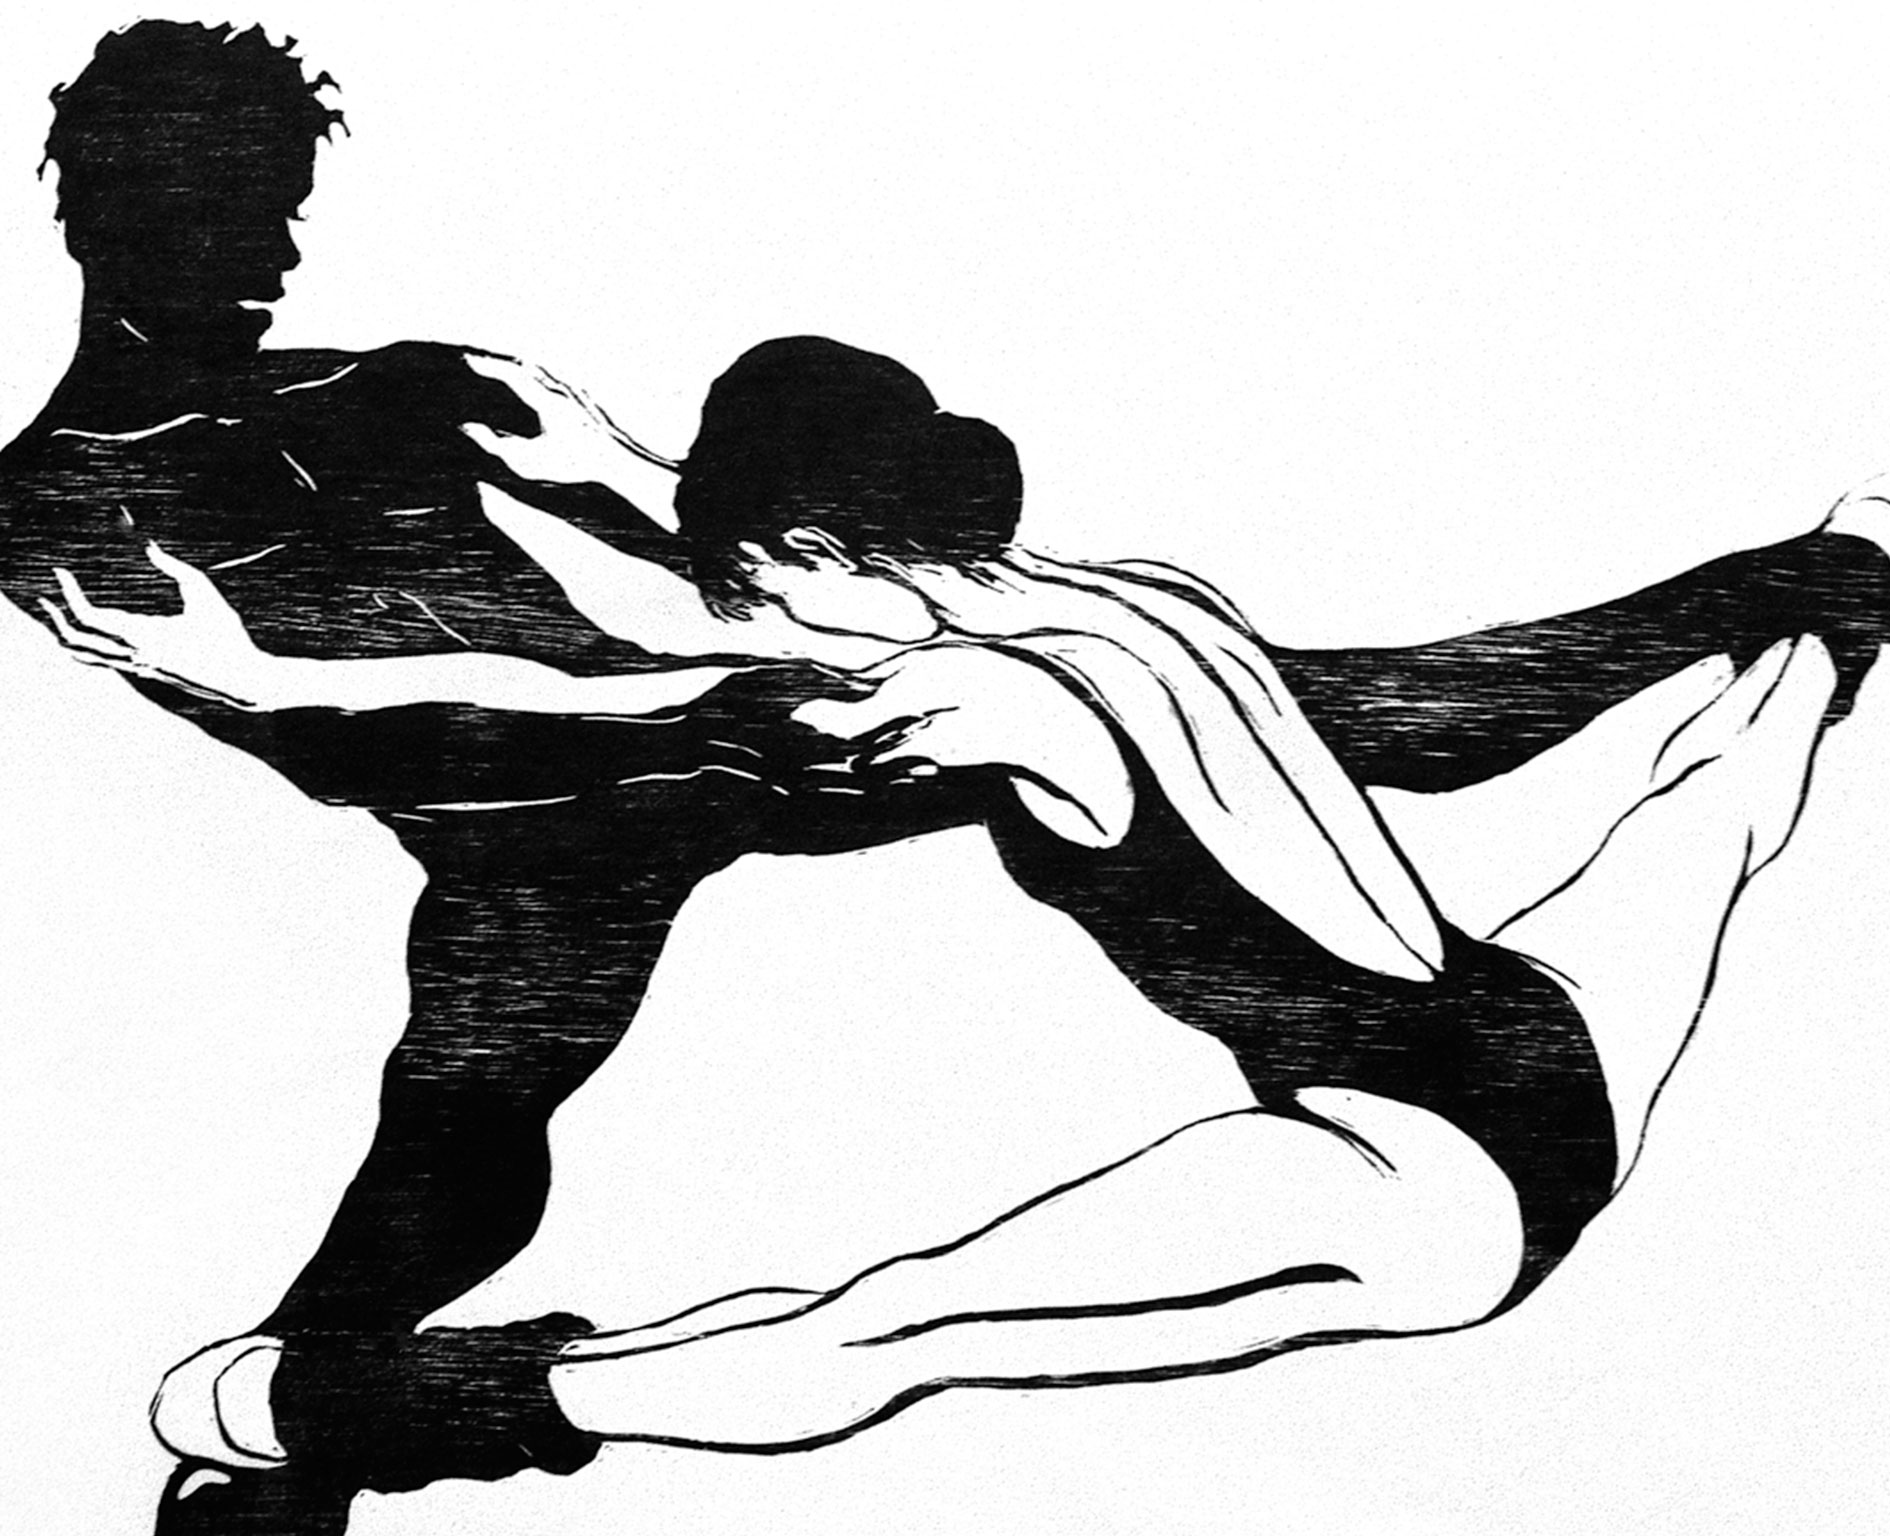 Dancers, streching. woodcut printed on rice paper, 70 x 50 cm.